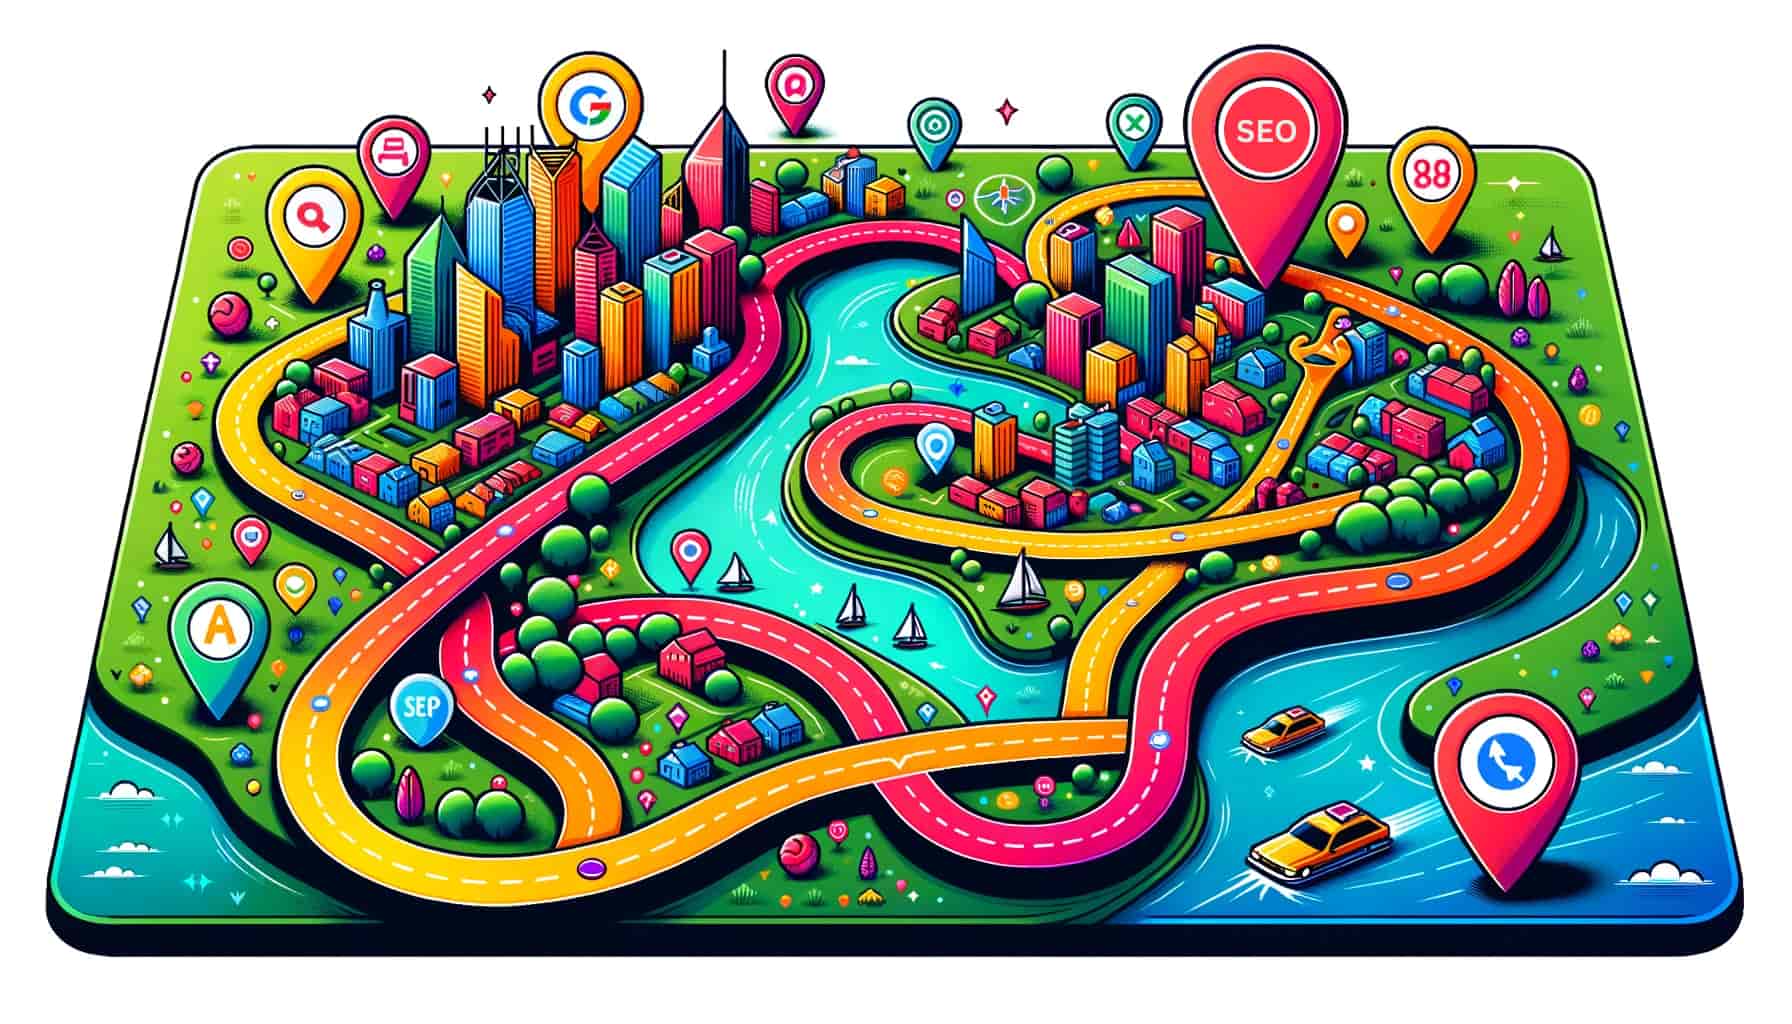  A colorful digital art map of a city with roads, buildings, and a river surrounding it. The roads are curved and there are many cars driving down them. The river is also curved and there are many boats sailing on it. The buildings are tall and brightly colored. There are many trees and parks throughout the city. 